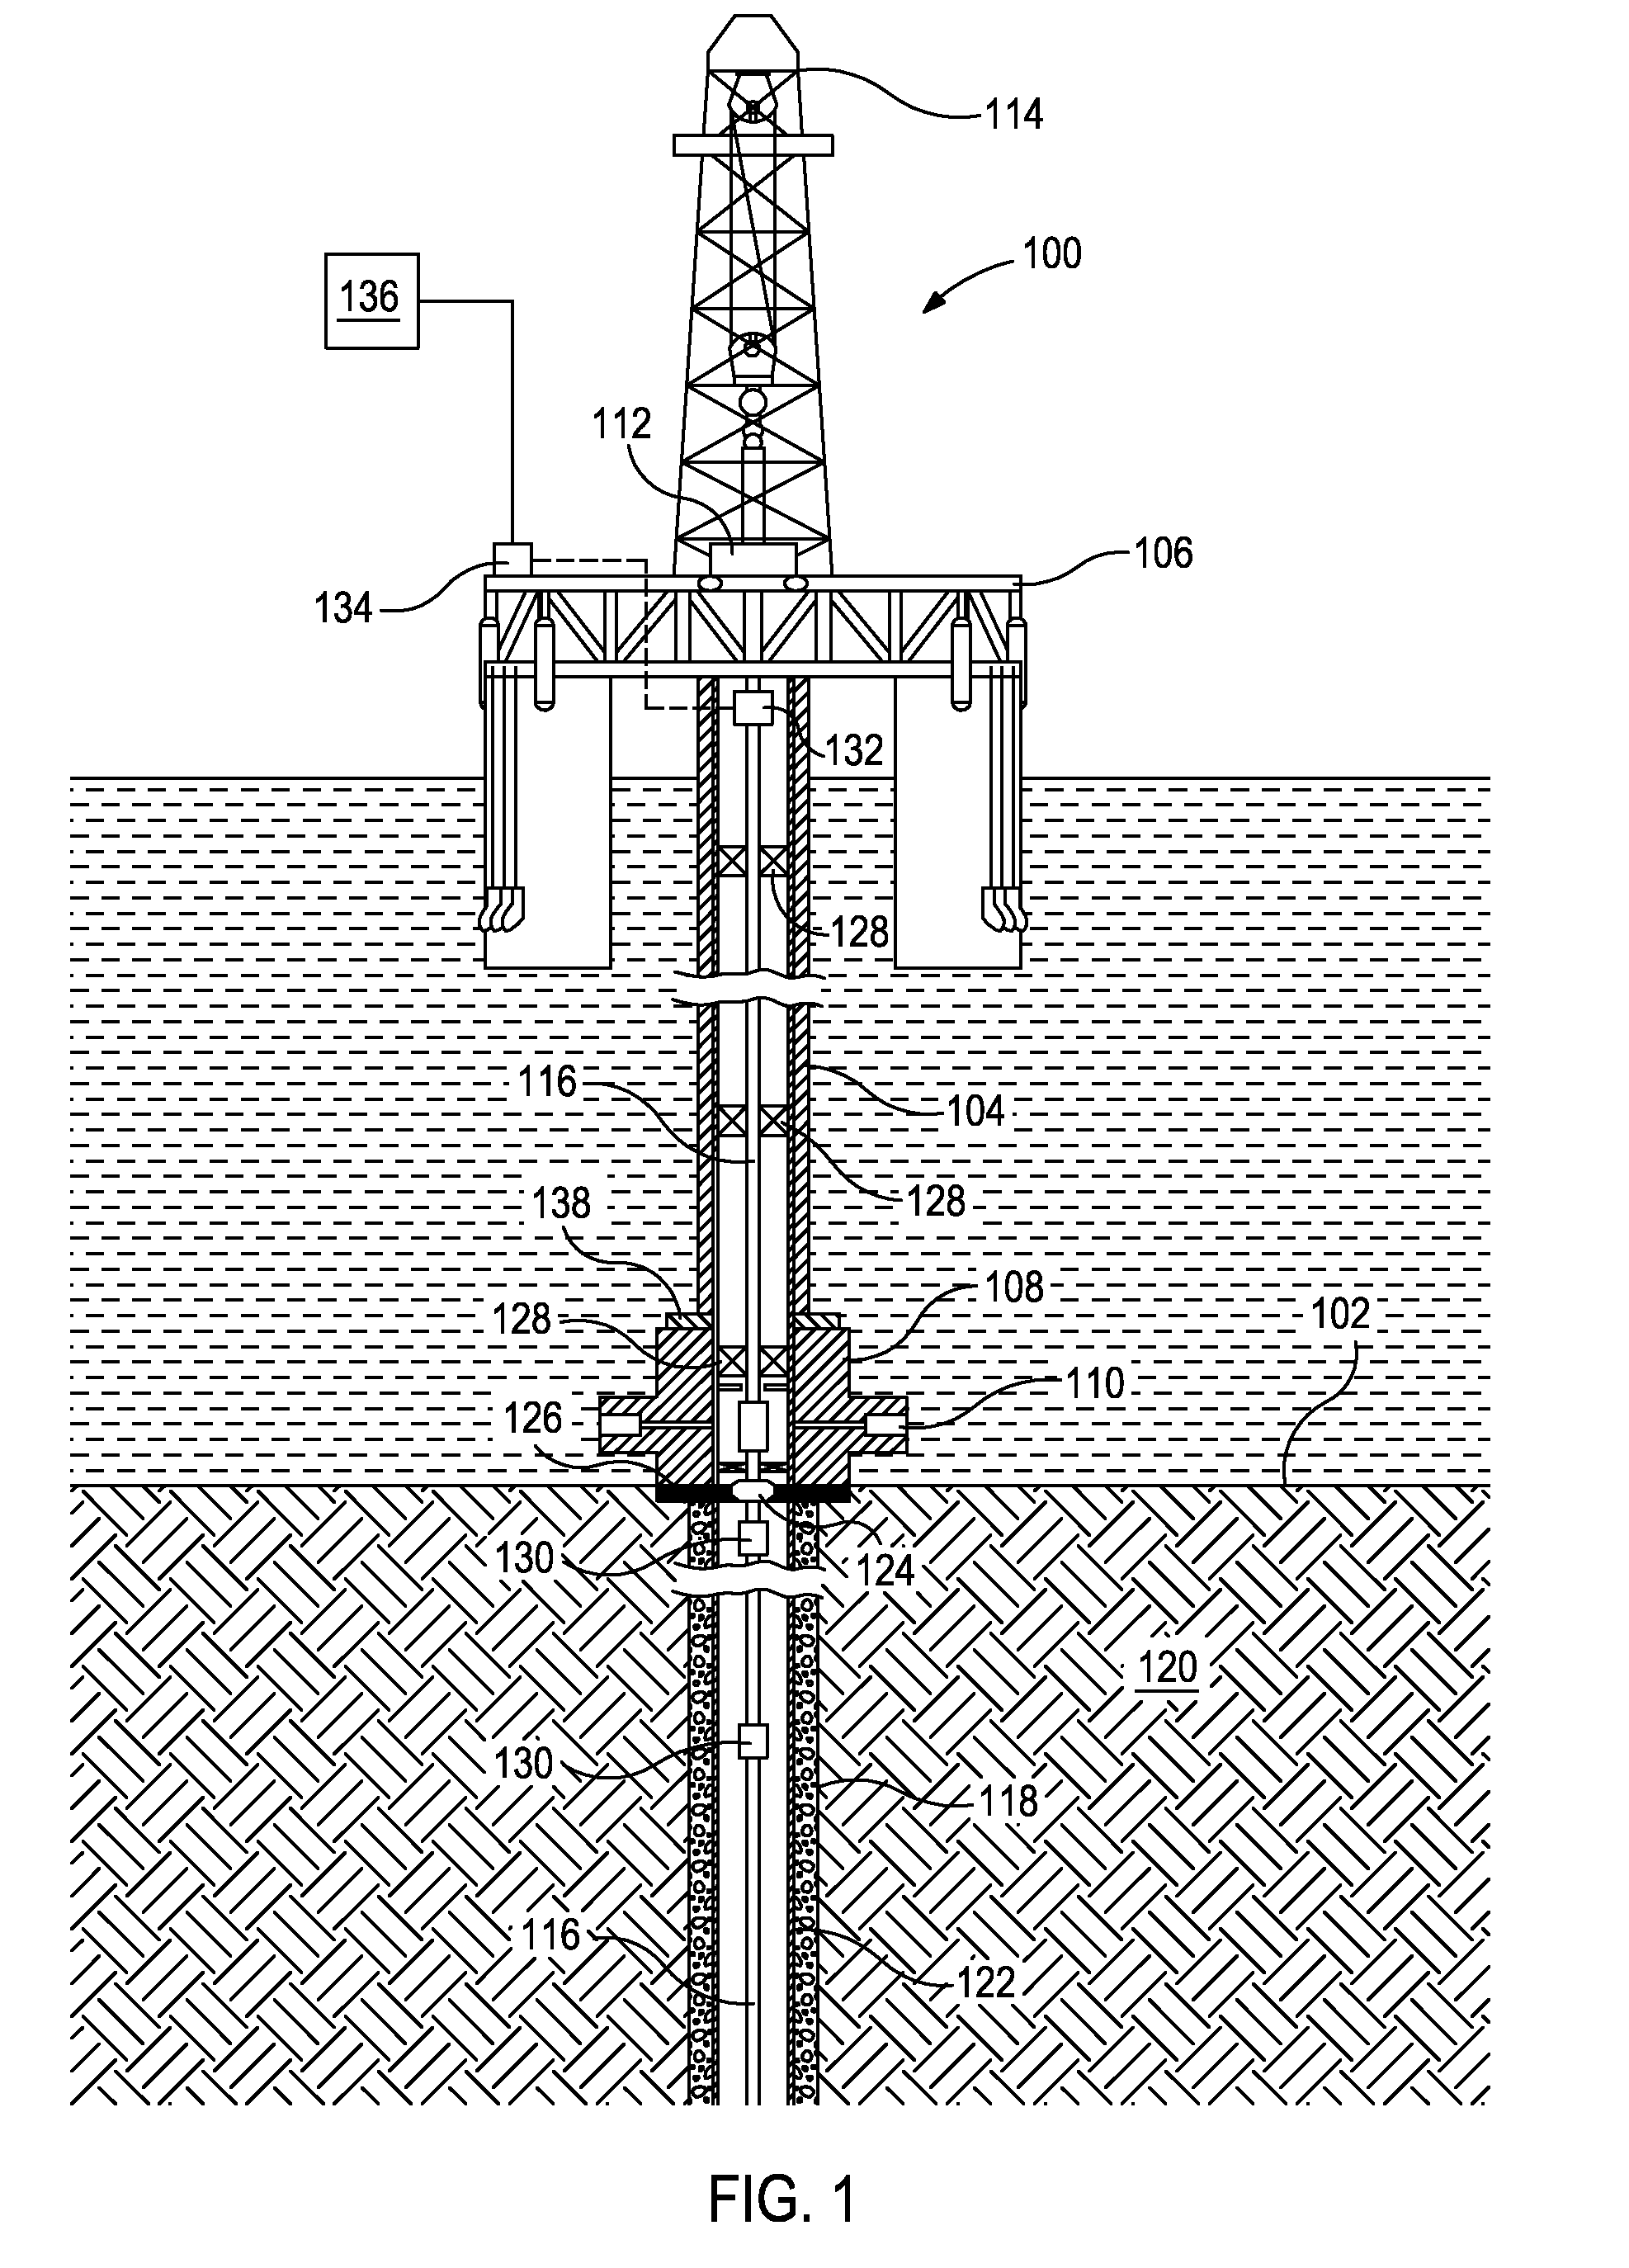 Method and Apparatus for Acoustic Noise Isolation in a Subterranean Well